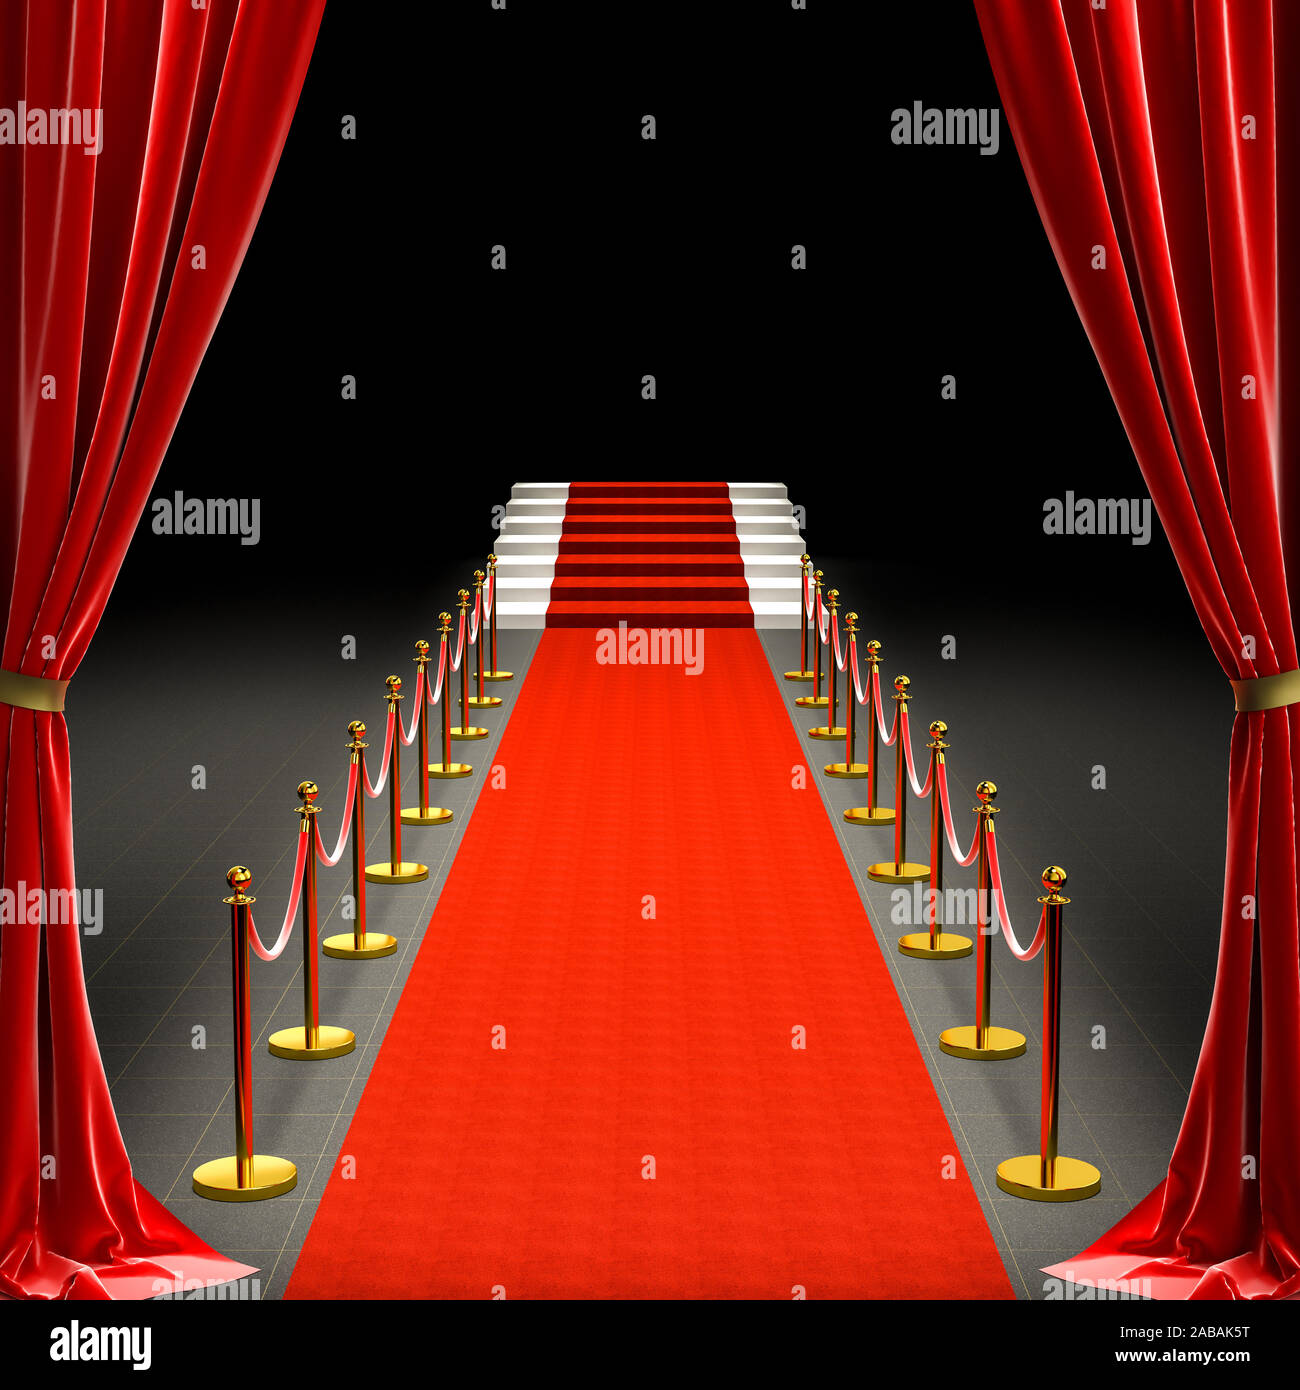 3d image of a red carpet and a staircase. barriers with rope and satin curtains. concept of exclusivity. Stock Photo